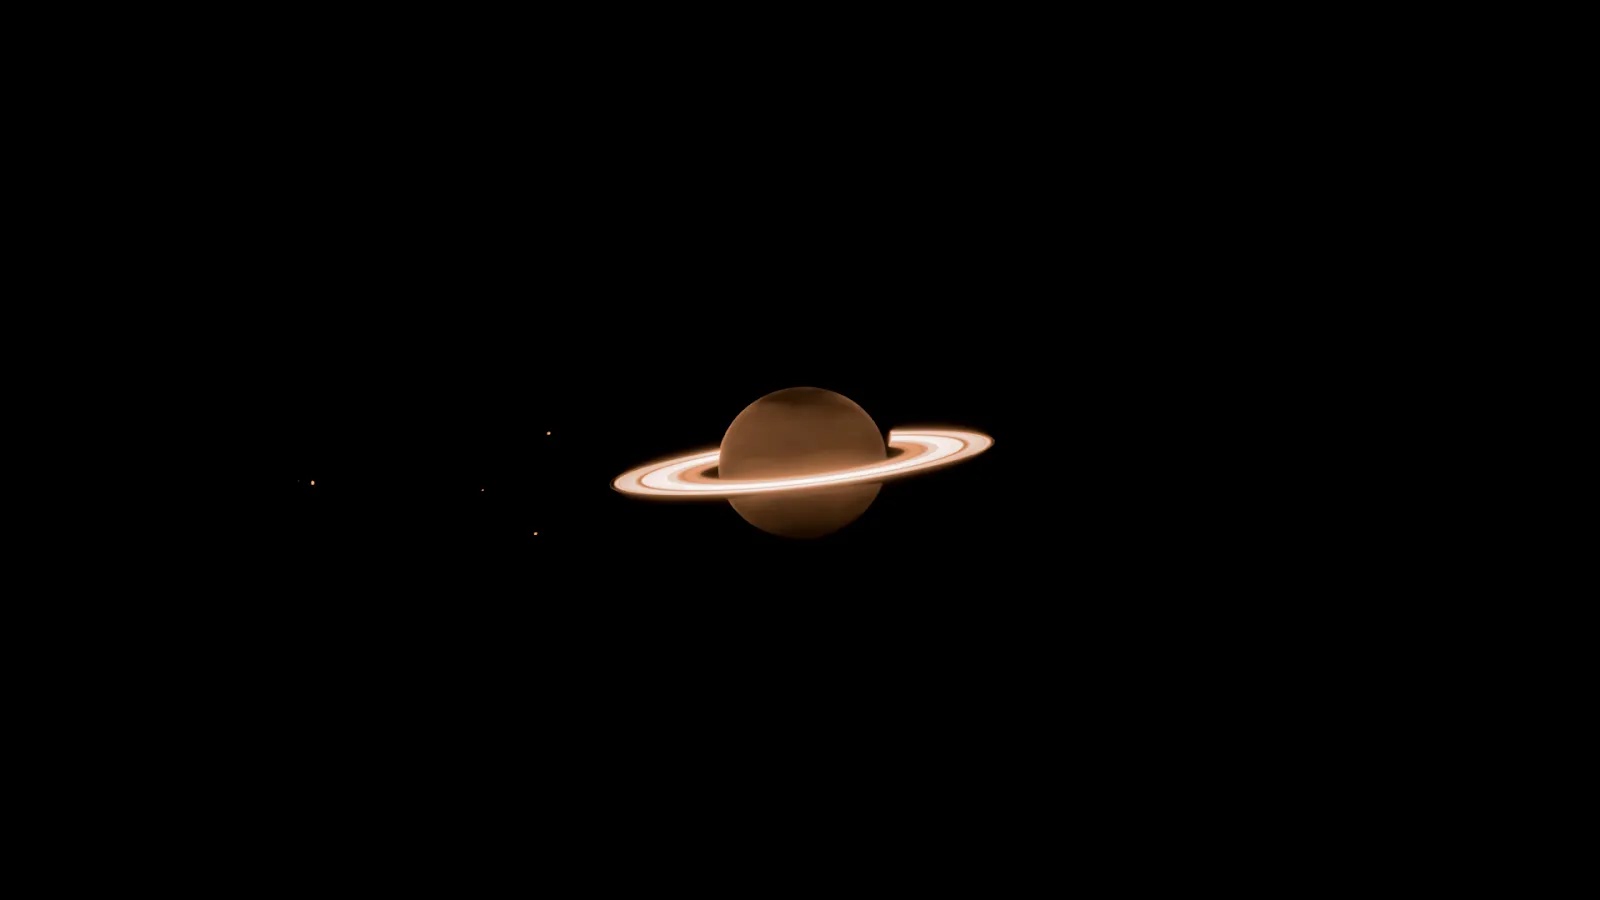 A serene image of Saturn with its iconic rings against the vast blackness of space.